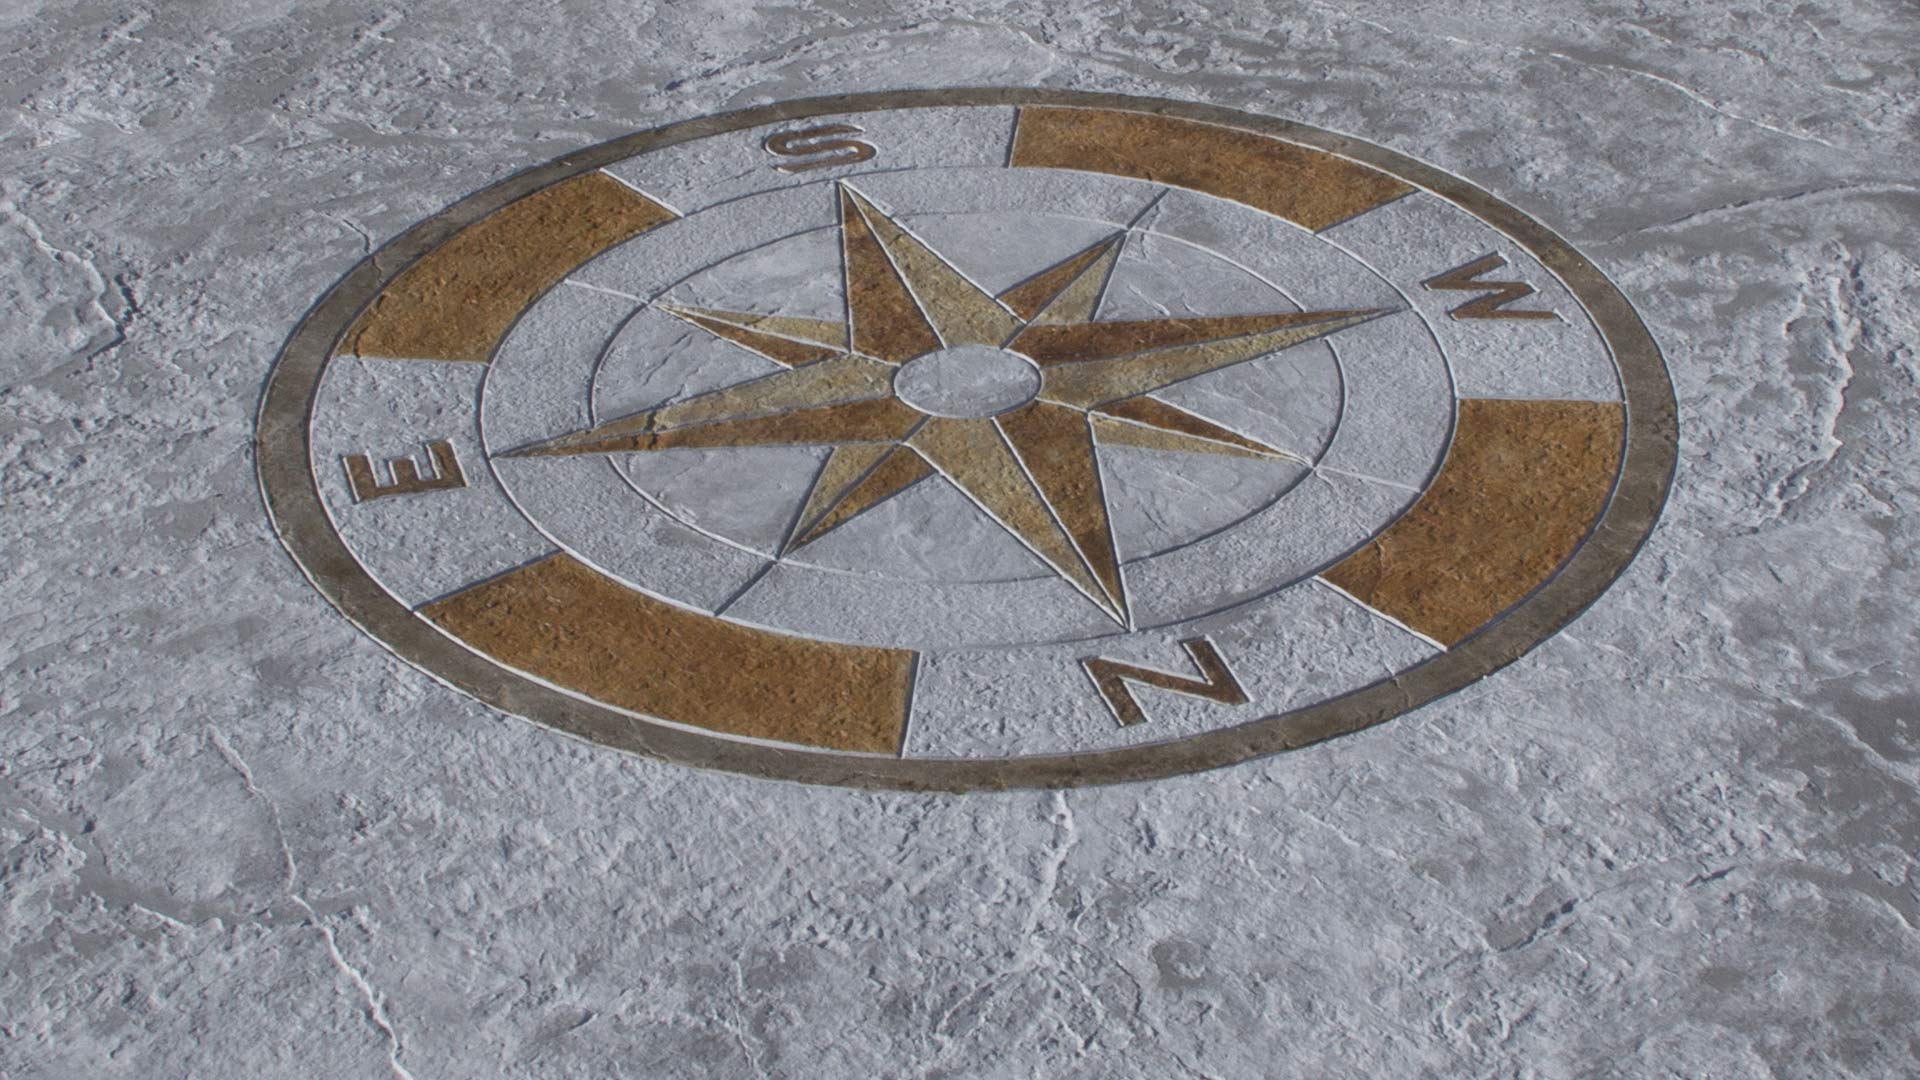 imprinted pavement with compass rose mould